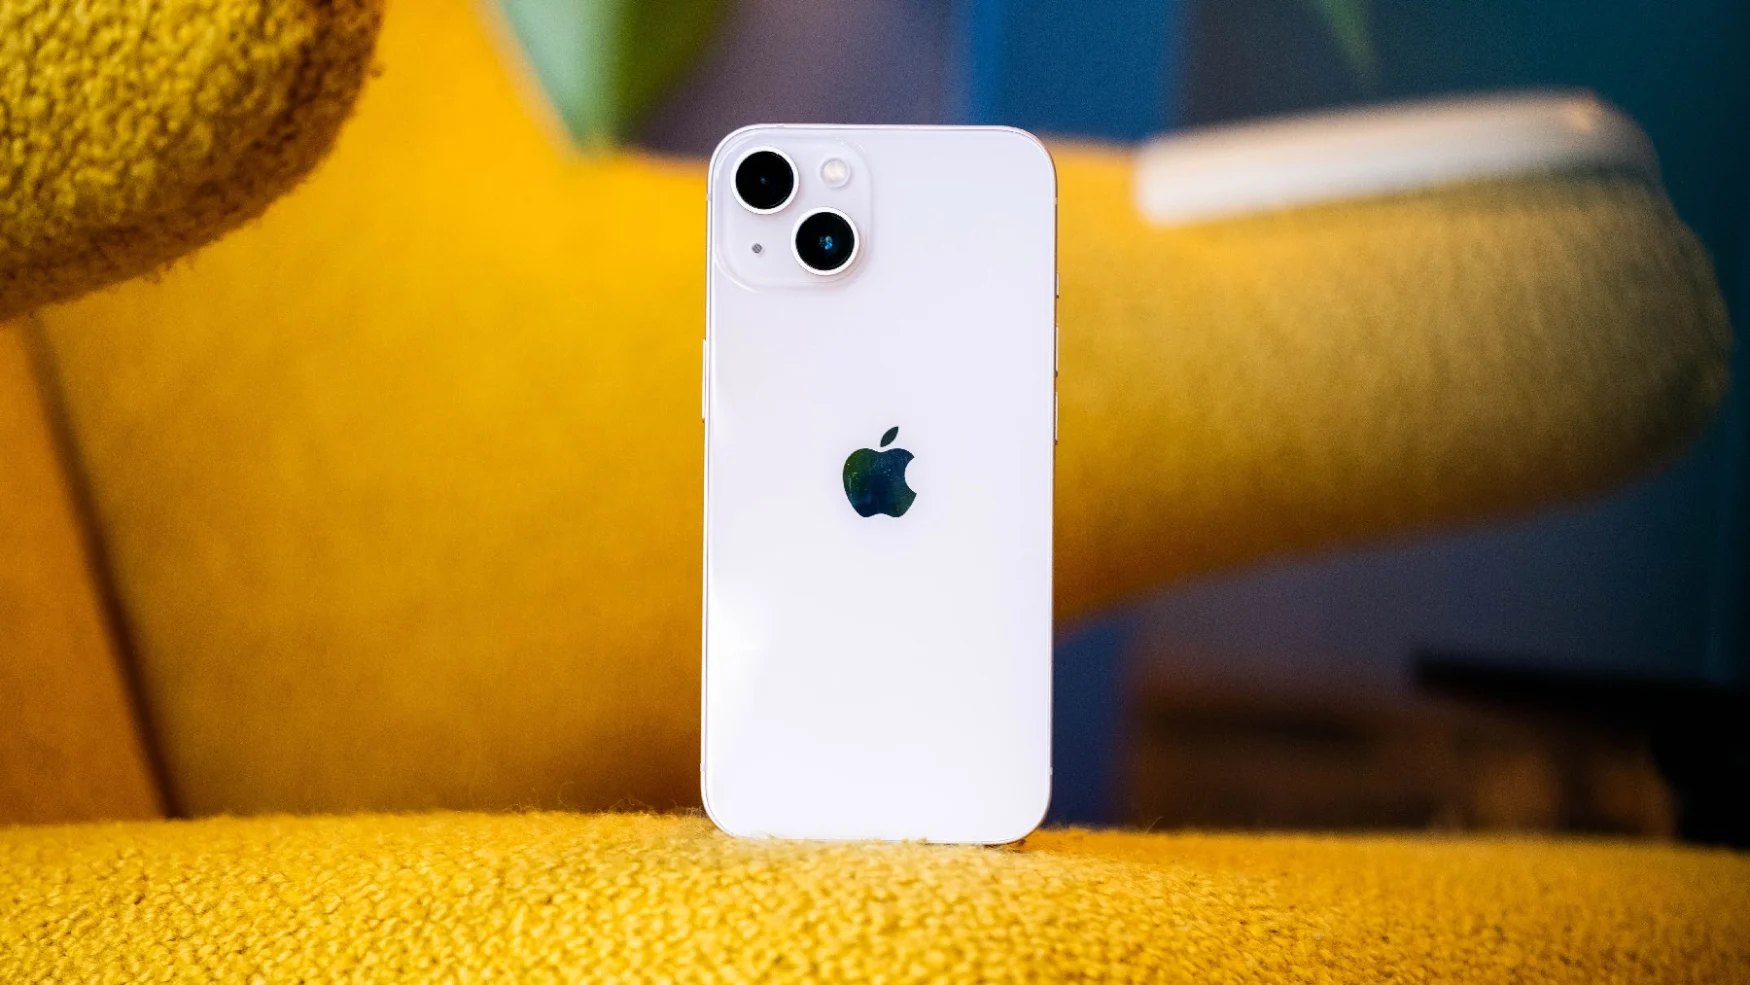 A pink iPhone 13 on a mustard-colored couch with its rear facing the camera.